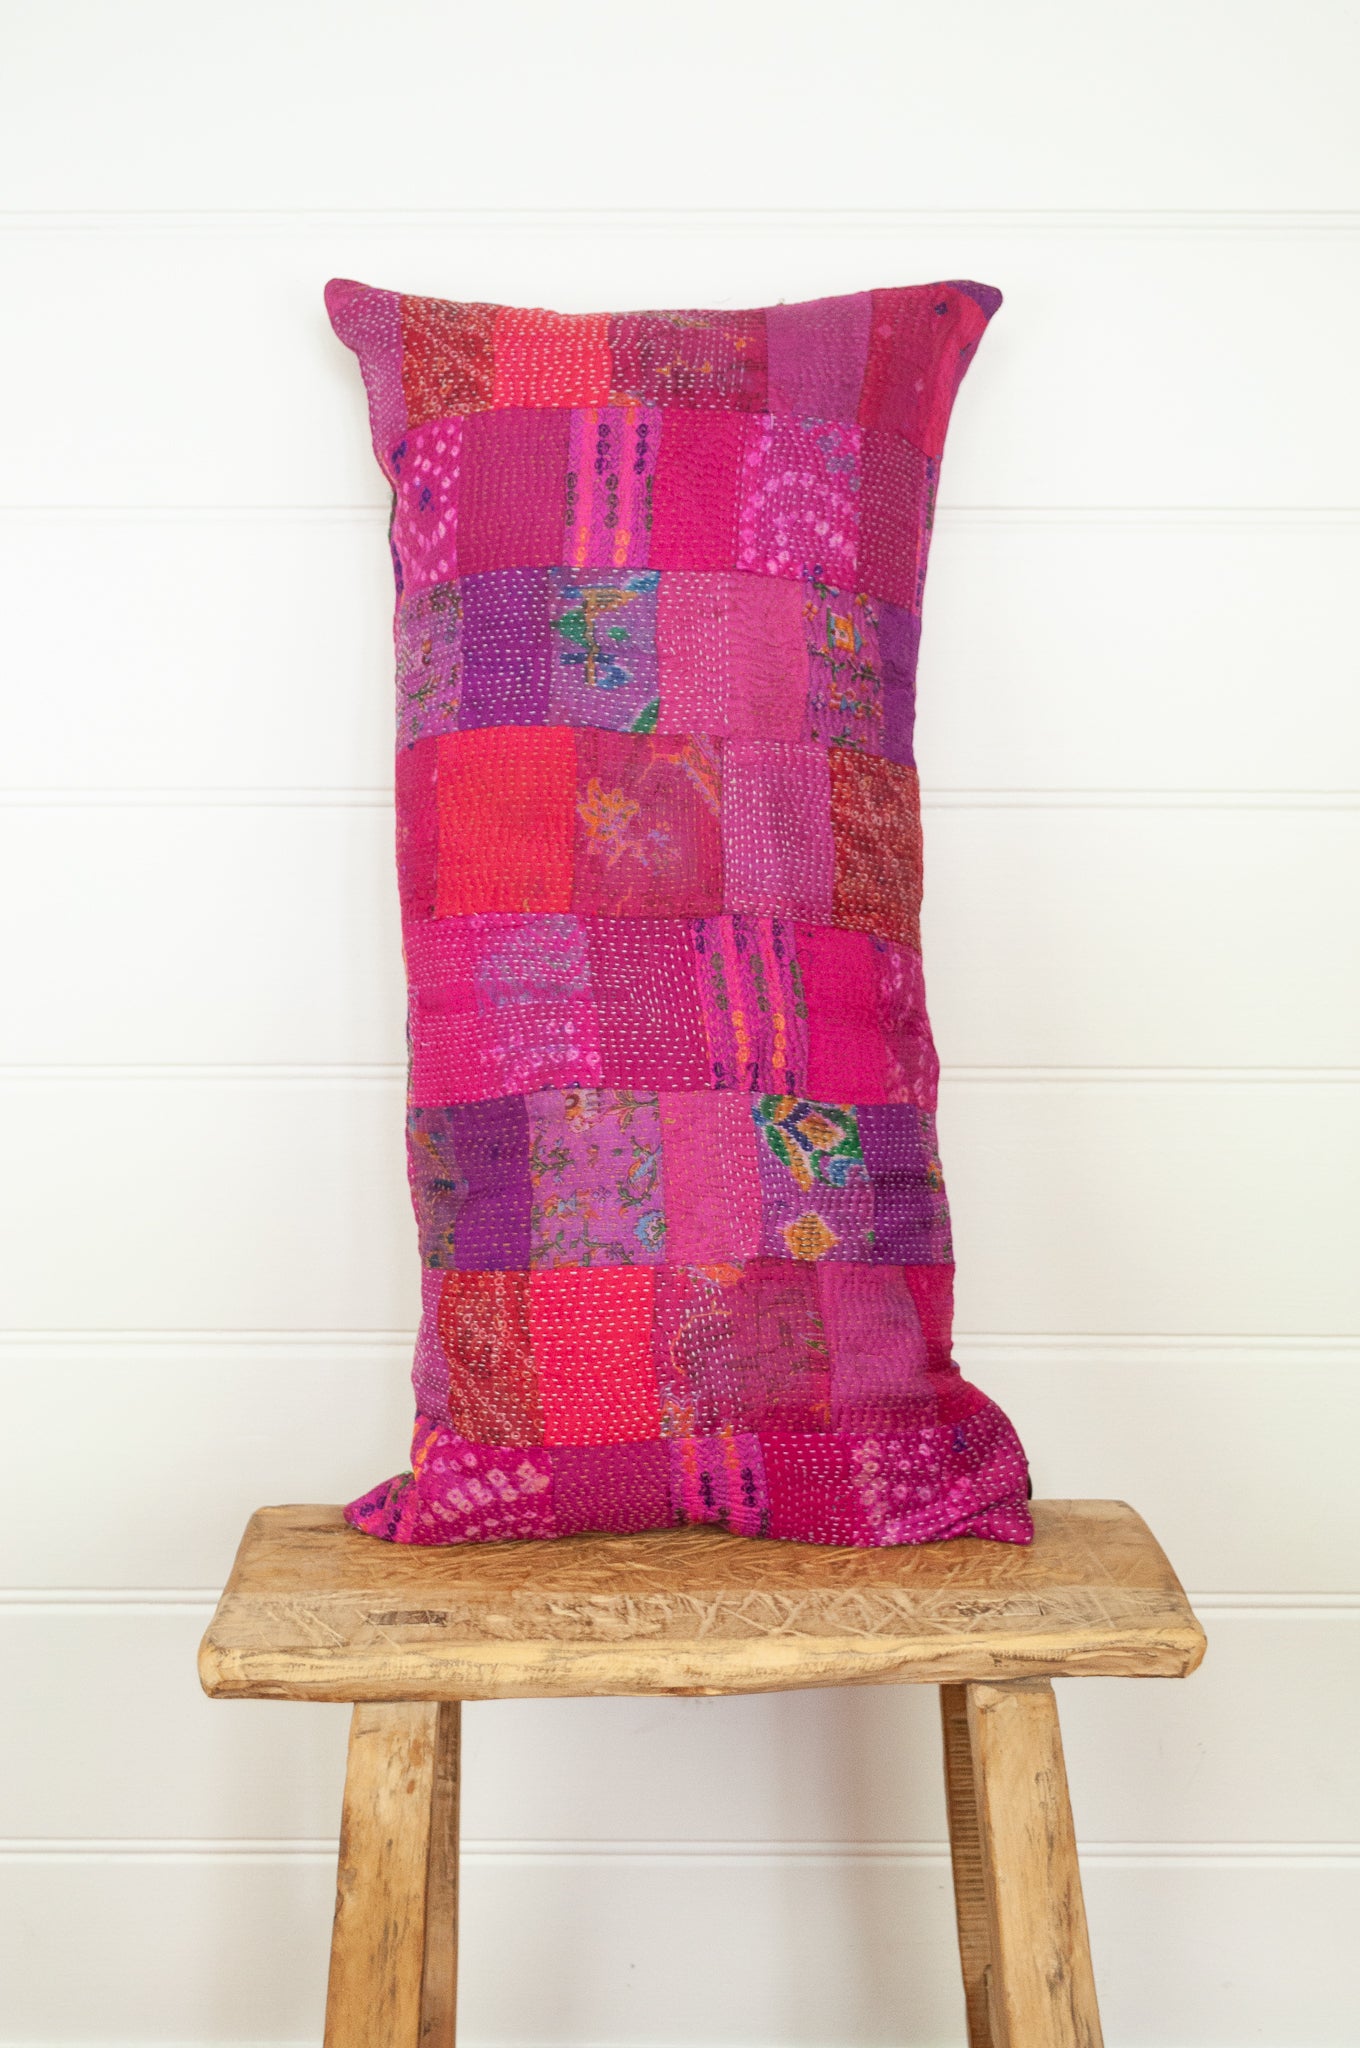 Vintage silk patchwork vibrant shades of magenta, vibrant pink and purple.